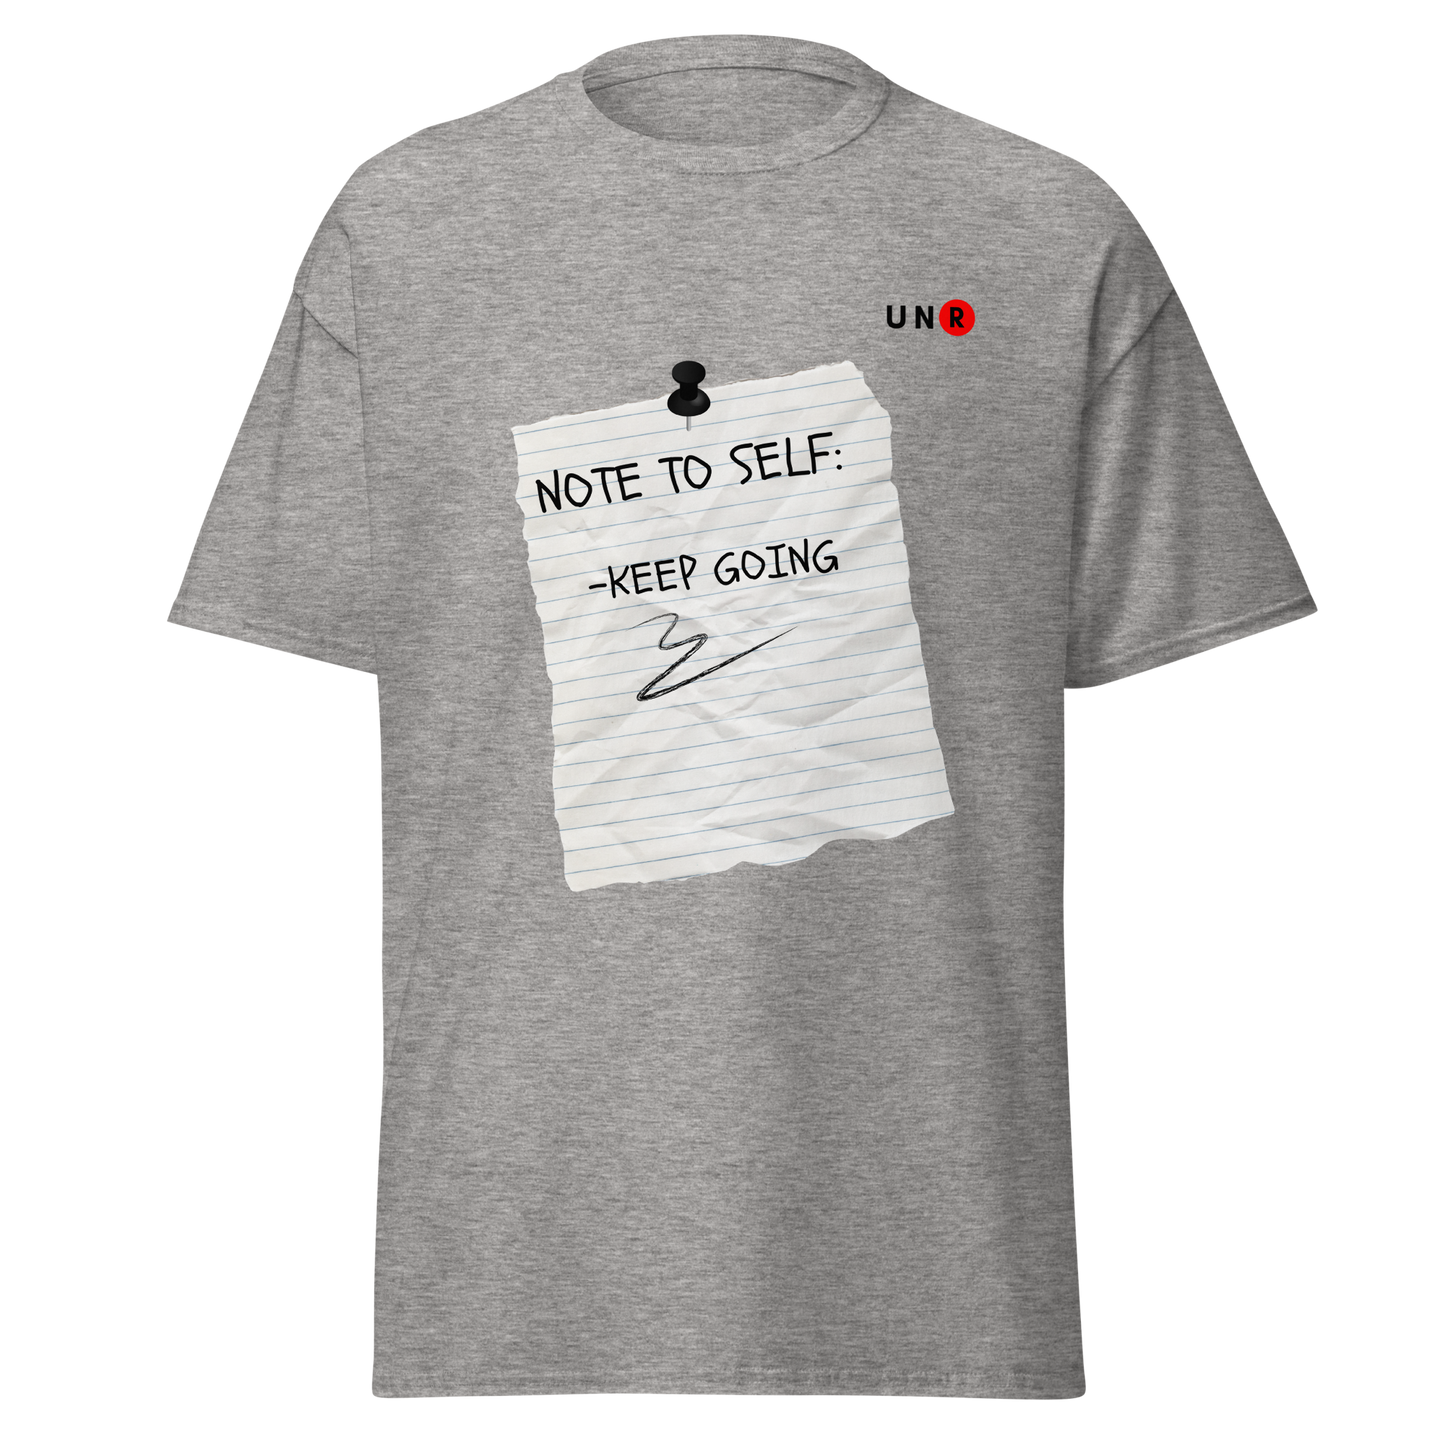 Note to self T-shirt